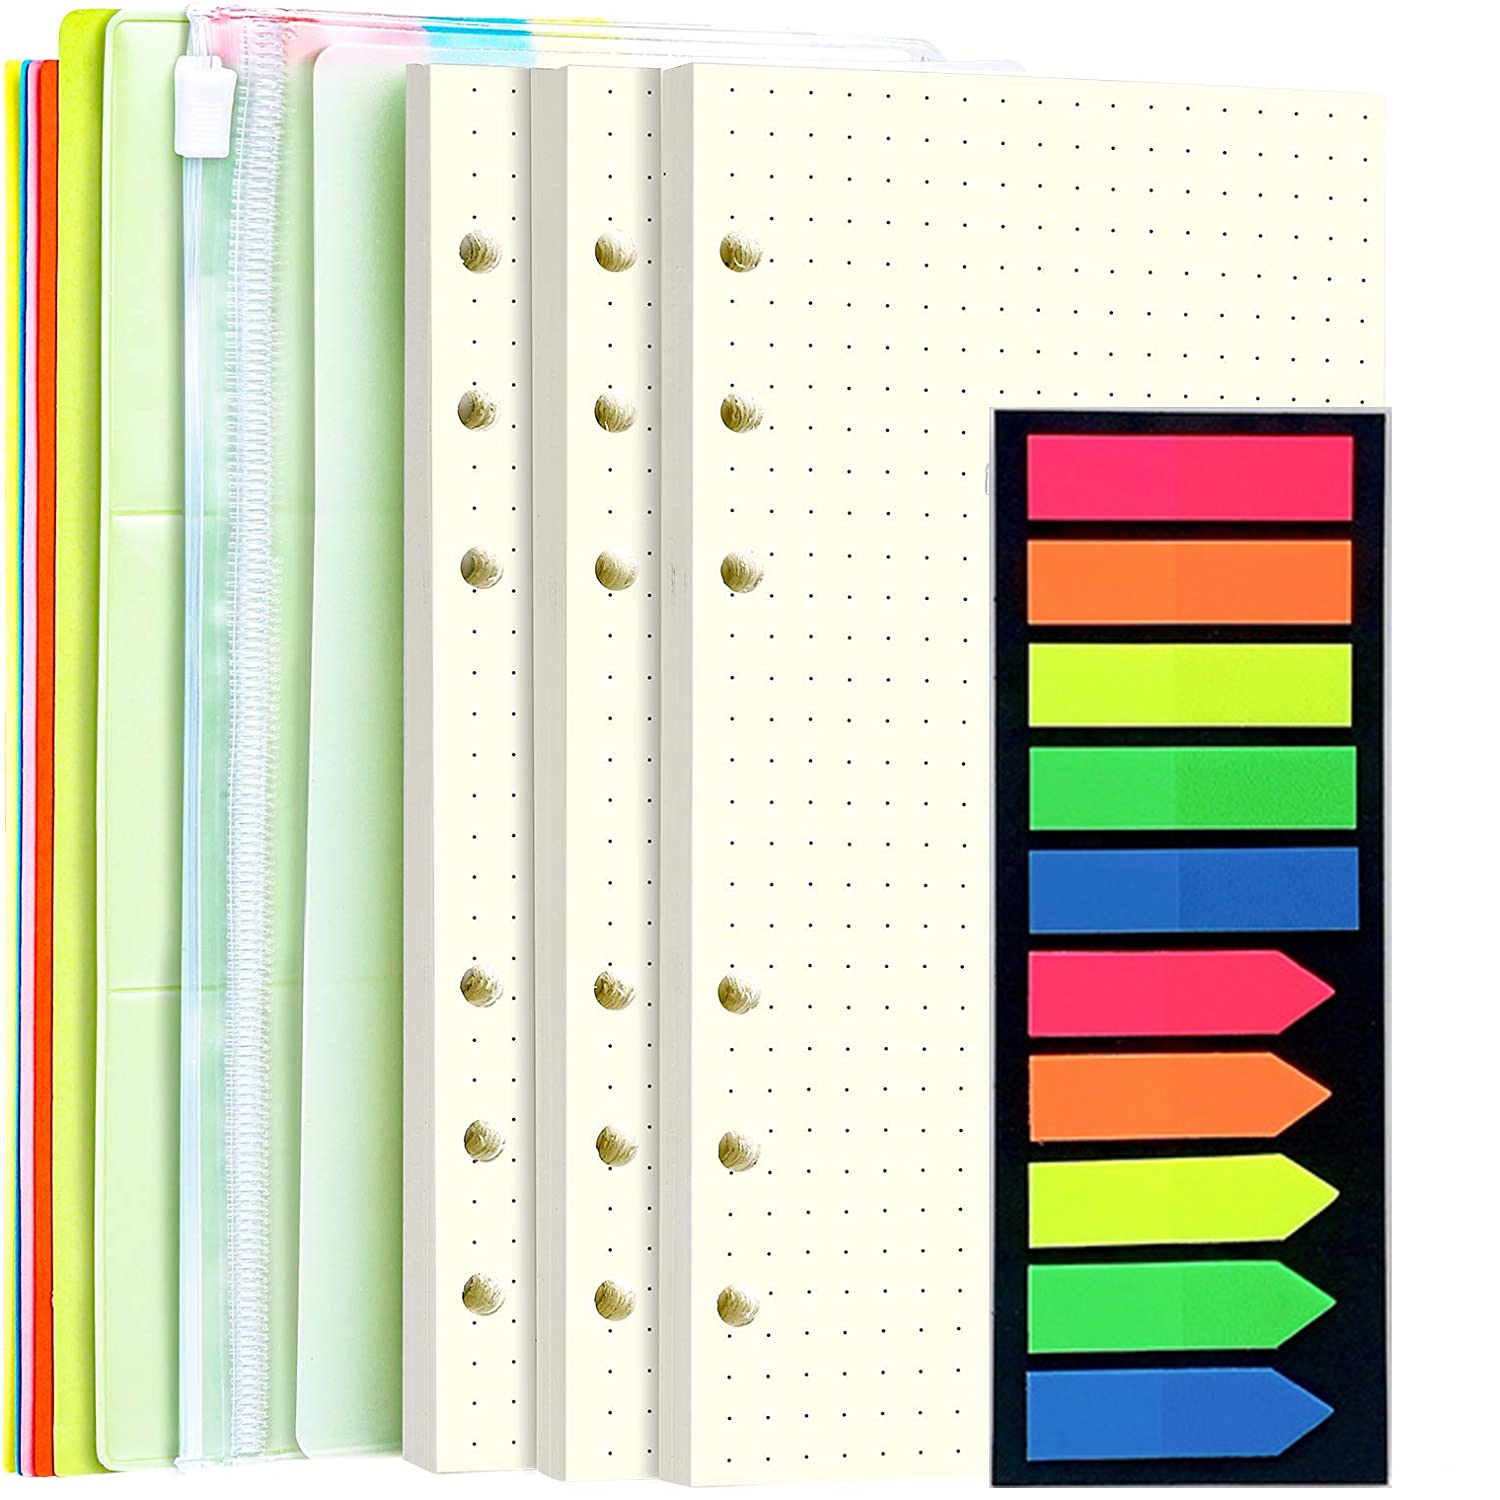 6-Pack Colored A6 Lined Binder Paper (240 Sheets/480 Pages), 6 Ring Hole  Punch Blank Loose Leaf Ruled Refill Inserts for Planner, Journal,  Notebooks, Budget Organizer - Yahoo Shopping